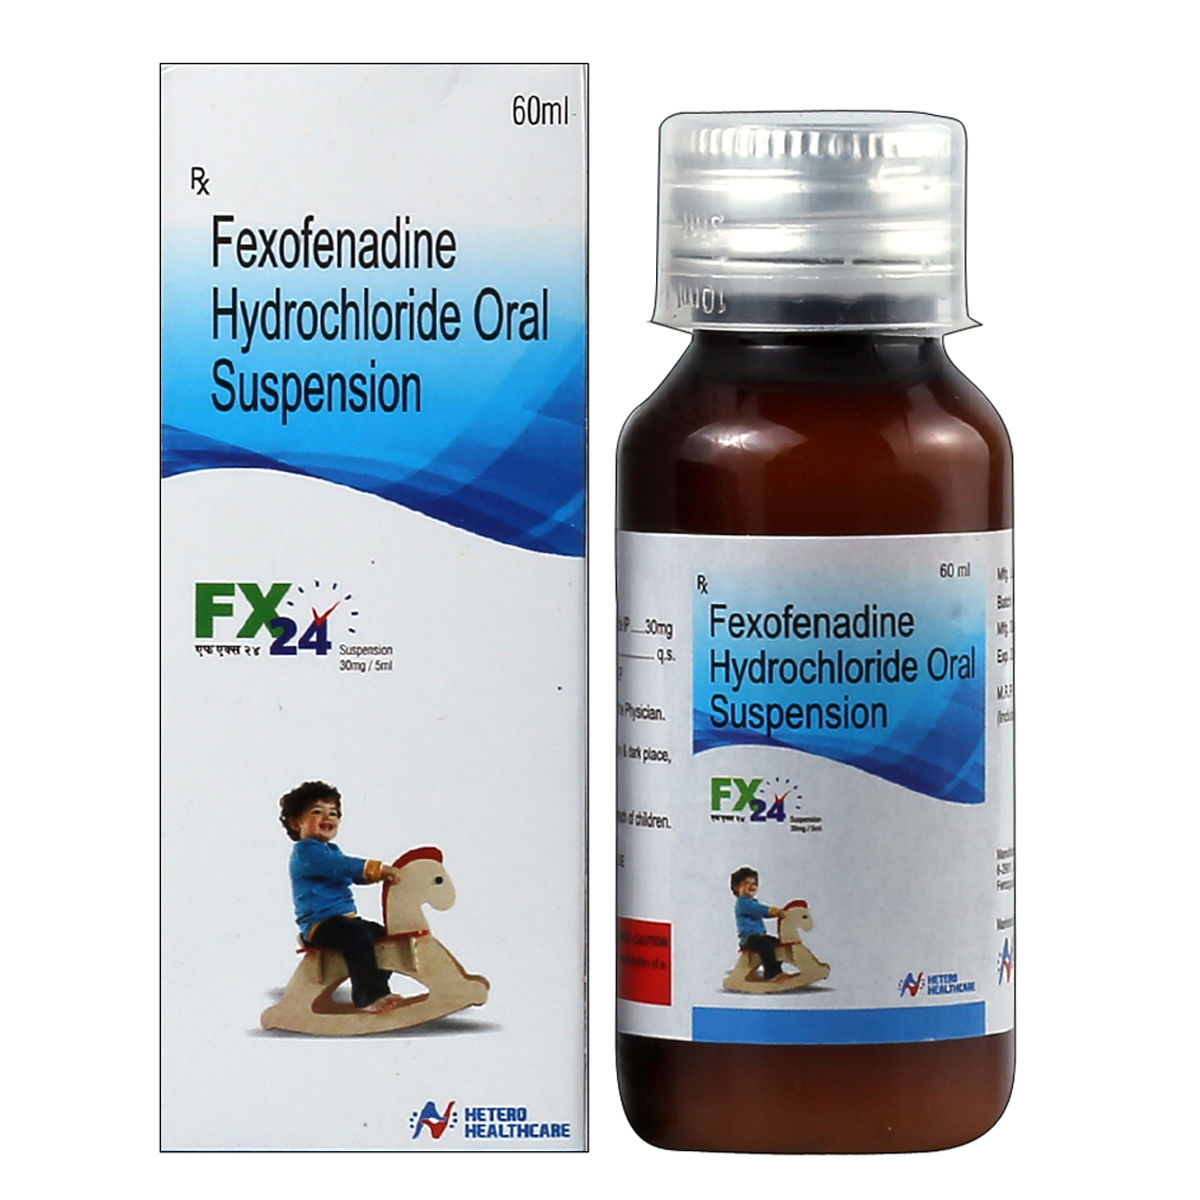 Fx 24 syrup uses